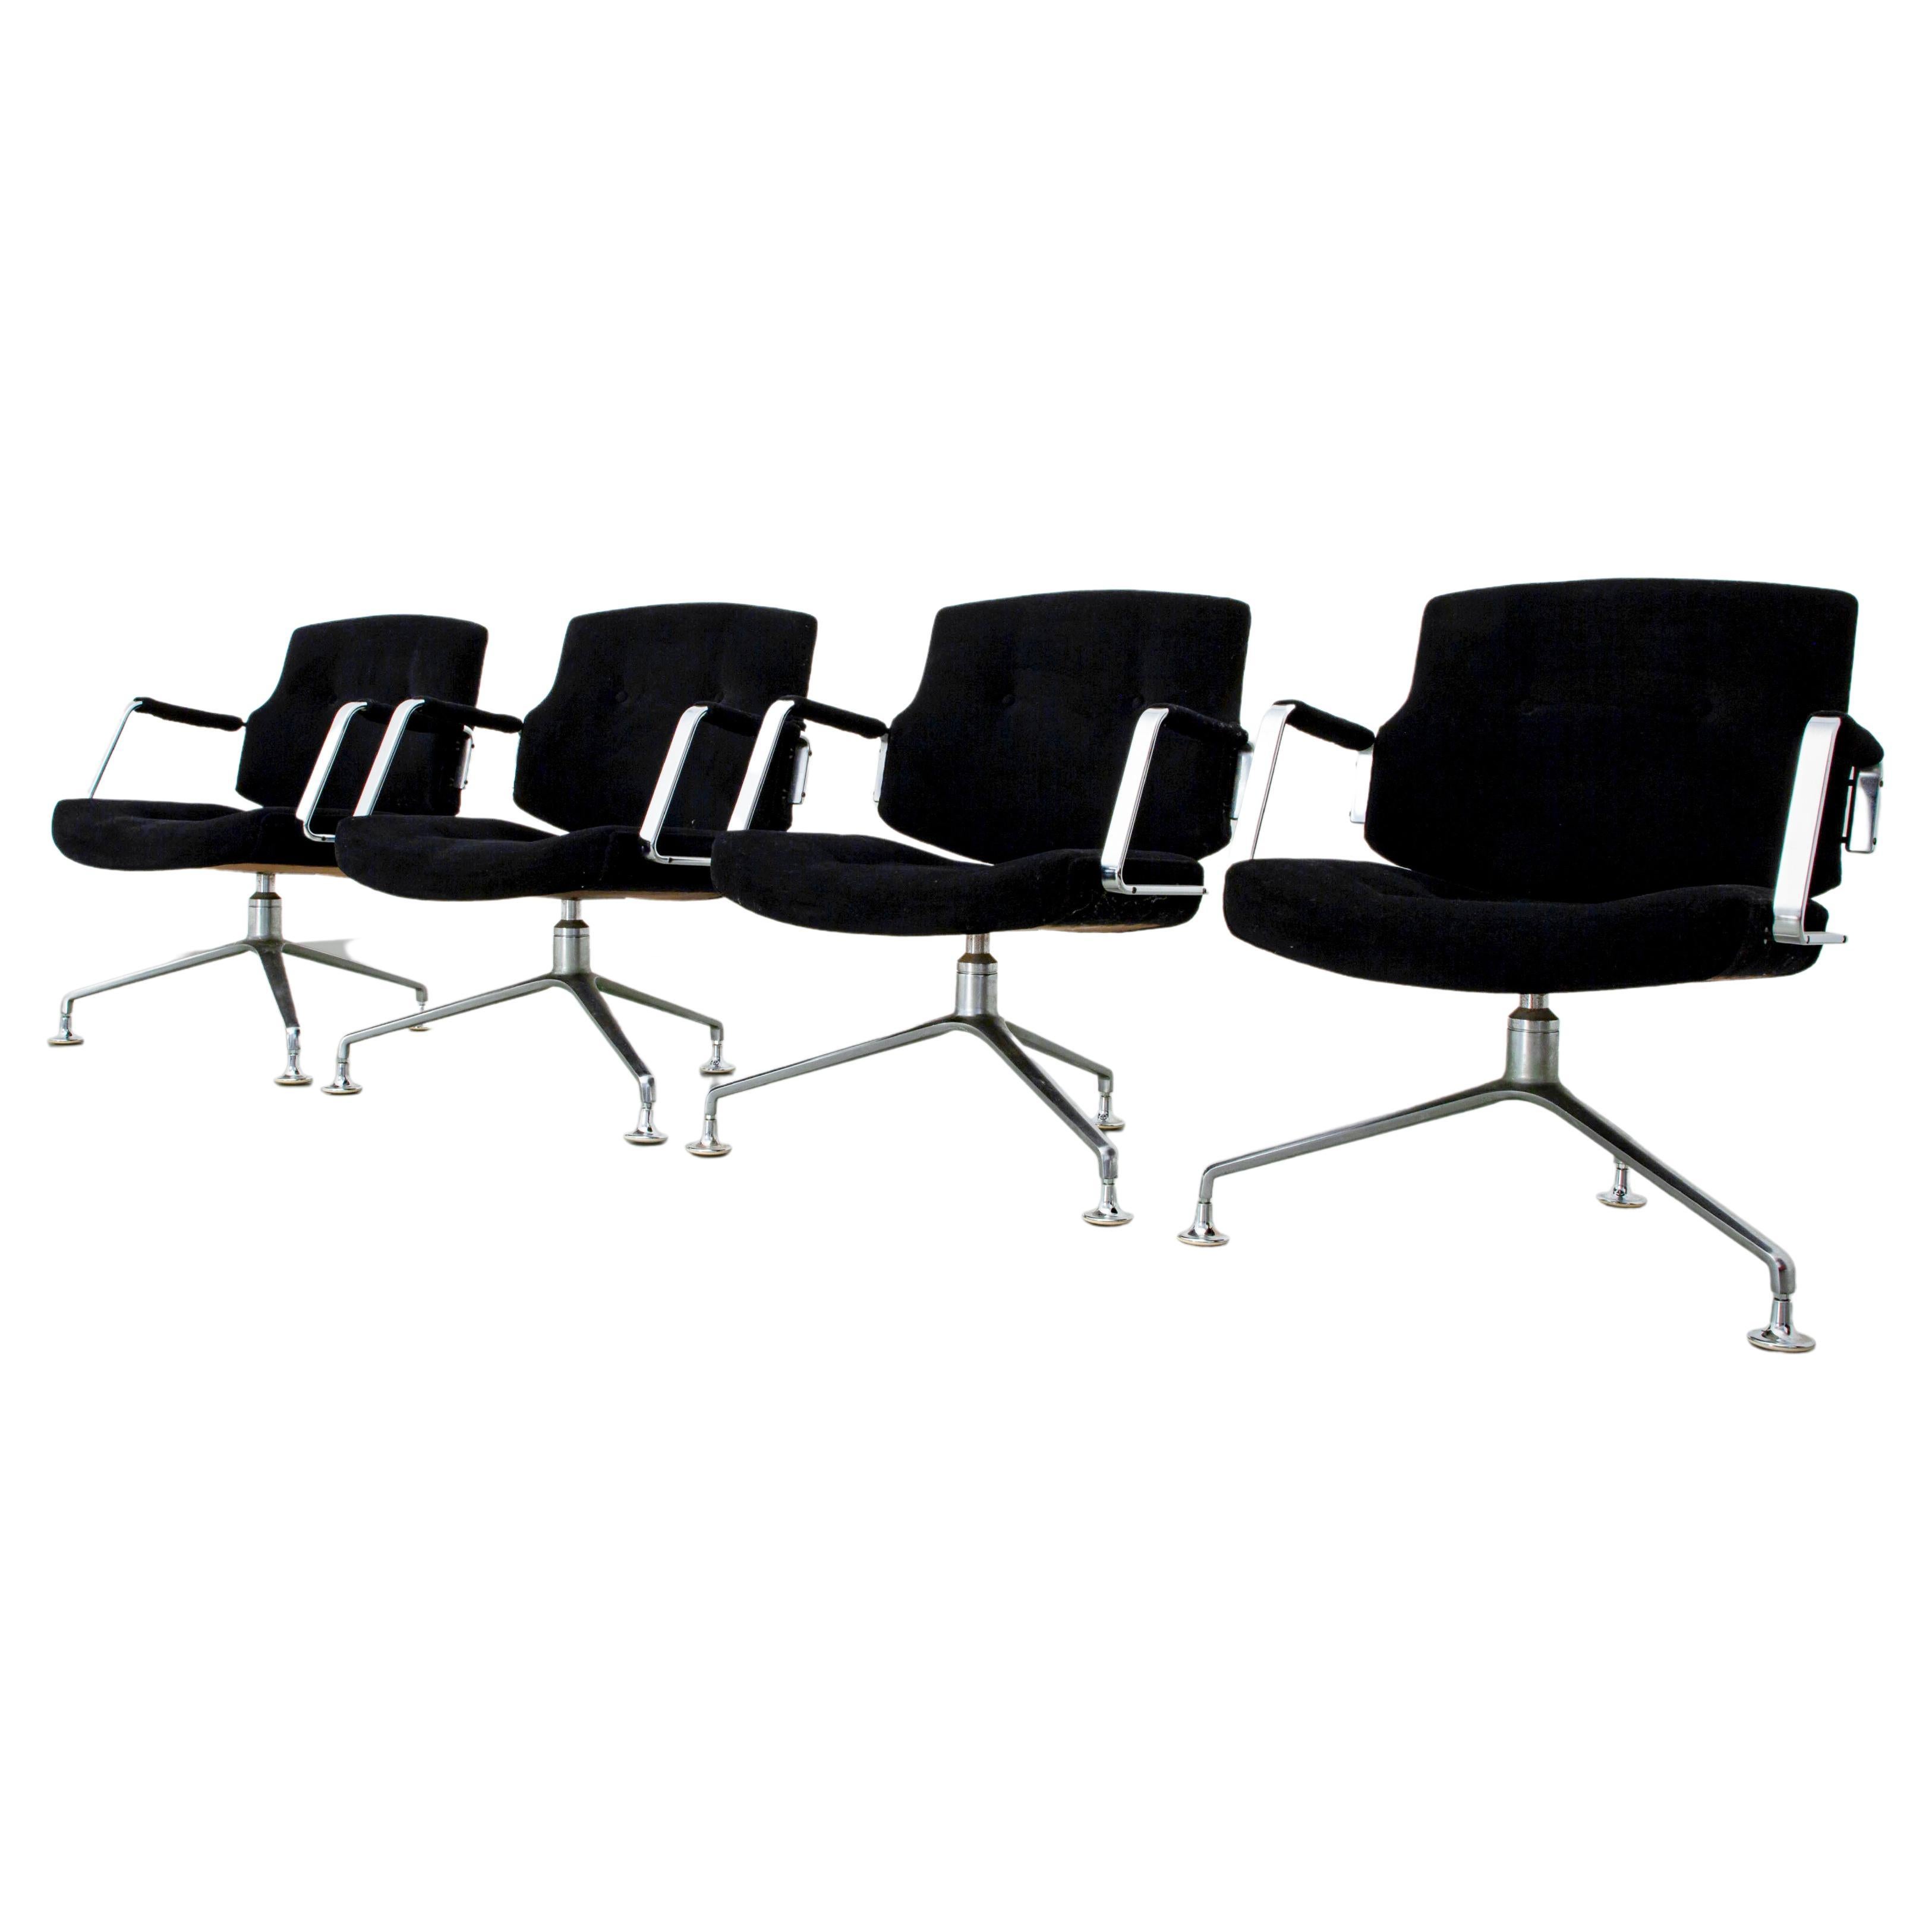 Set of 4 FK 84 Armchairs by Fabricius and Kastholm for Kill Int., Denmark, 1962 For Sale